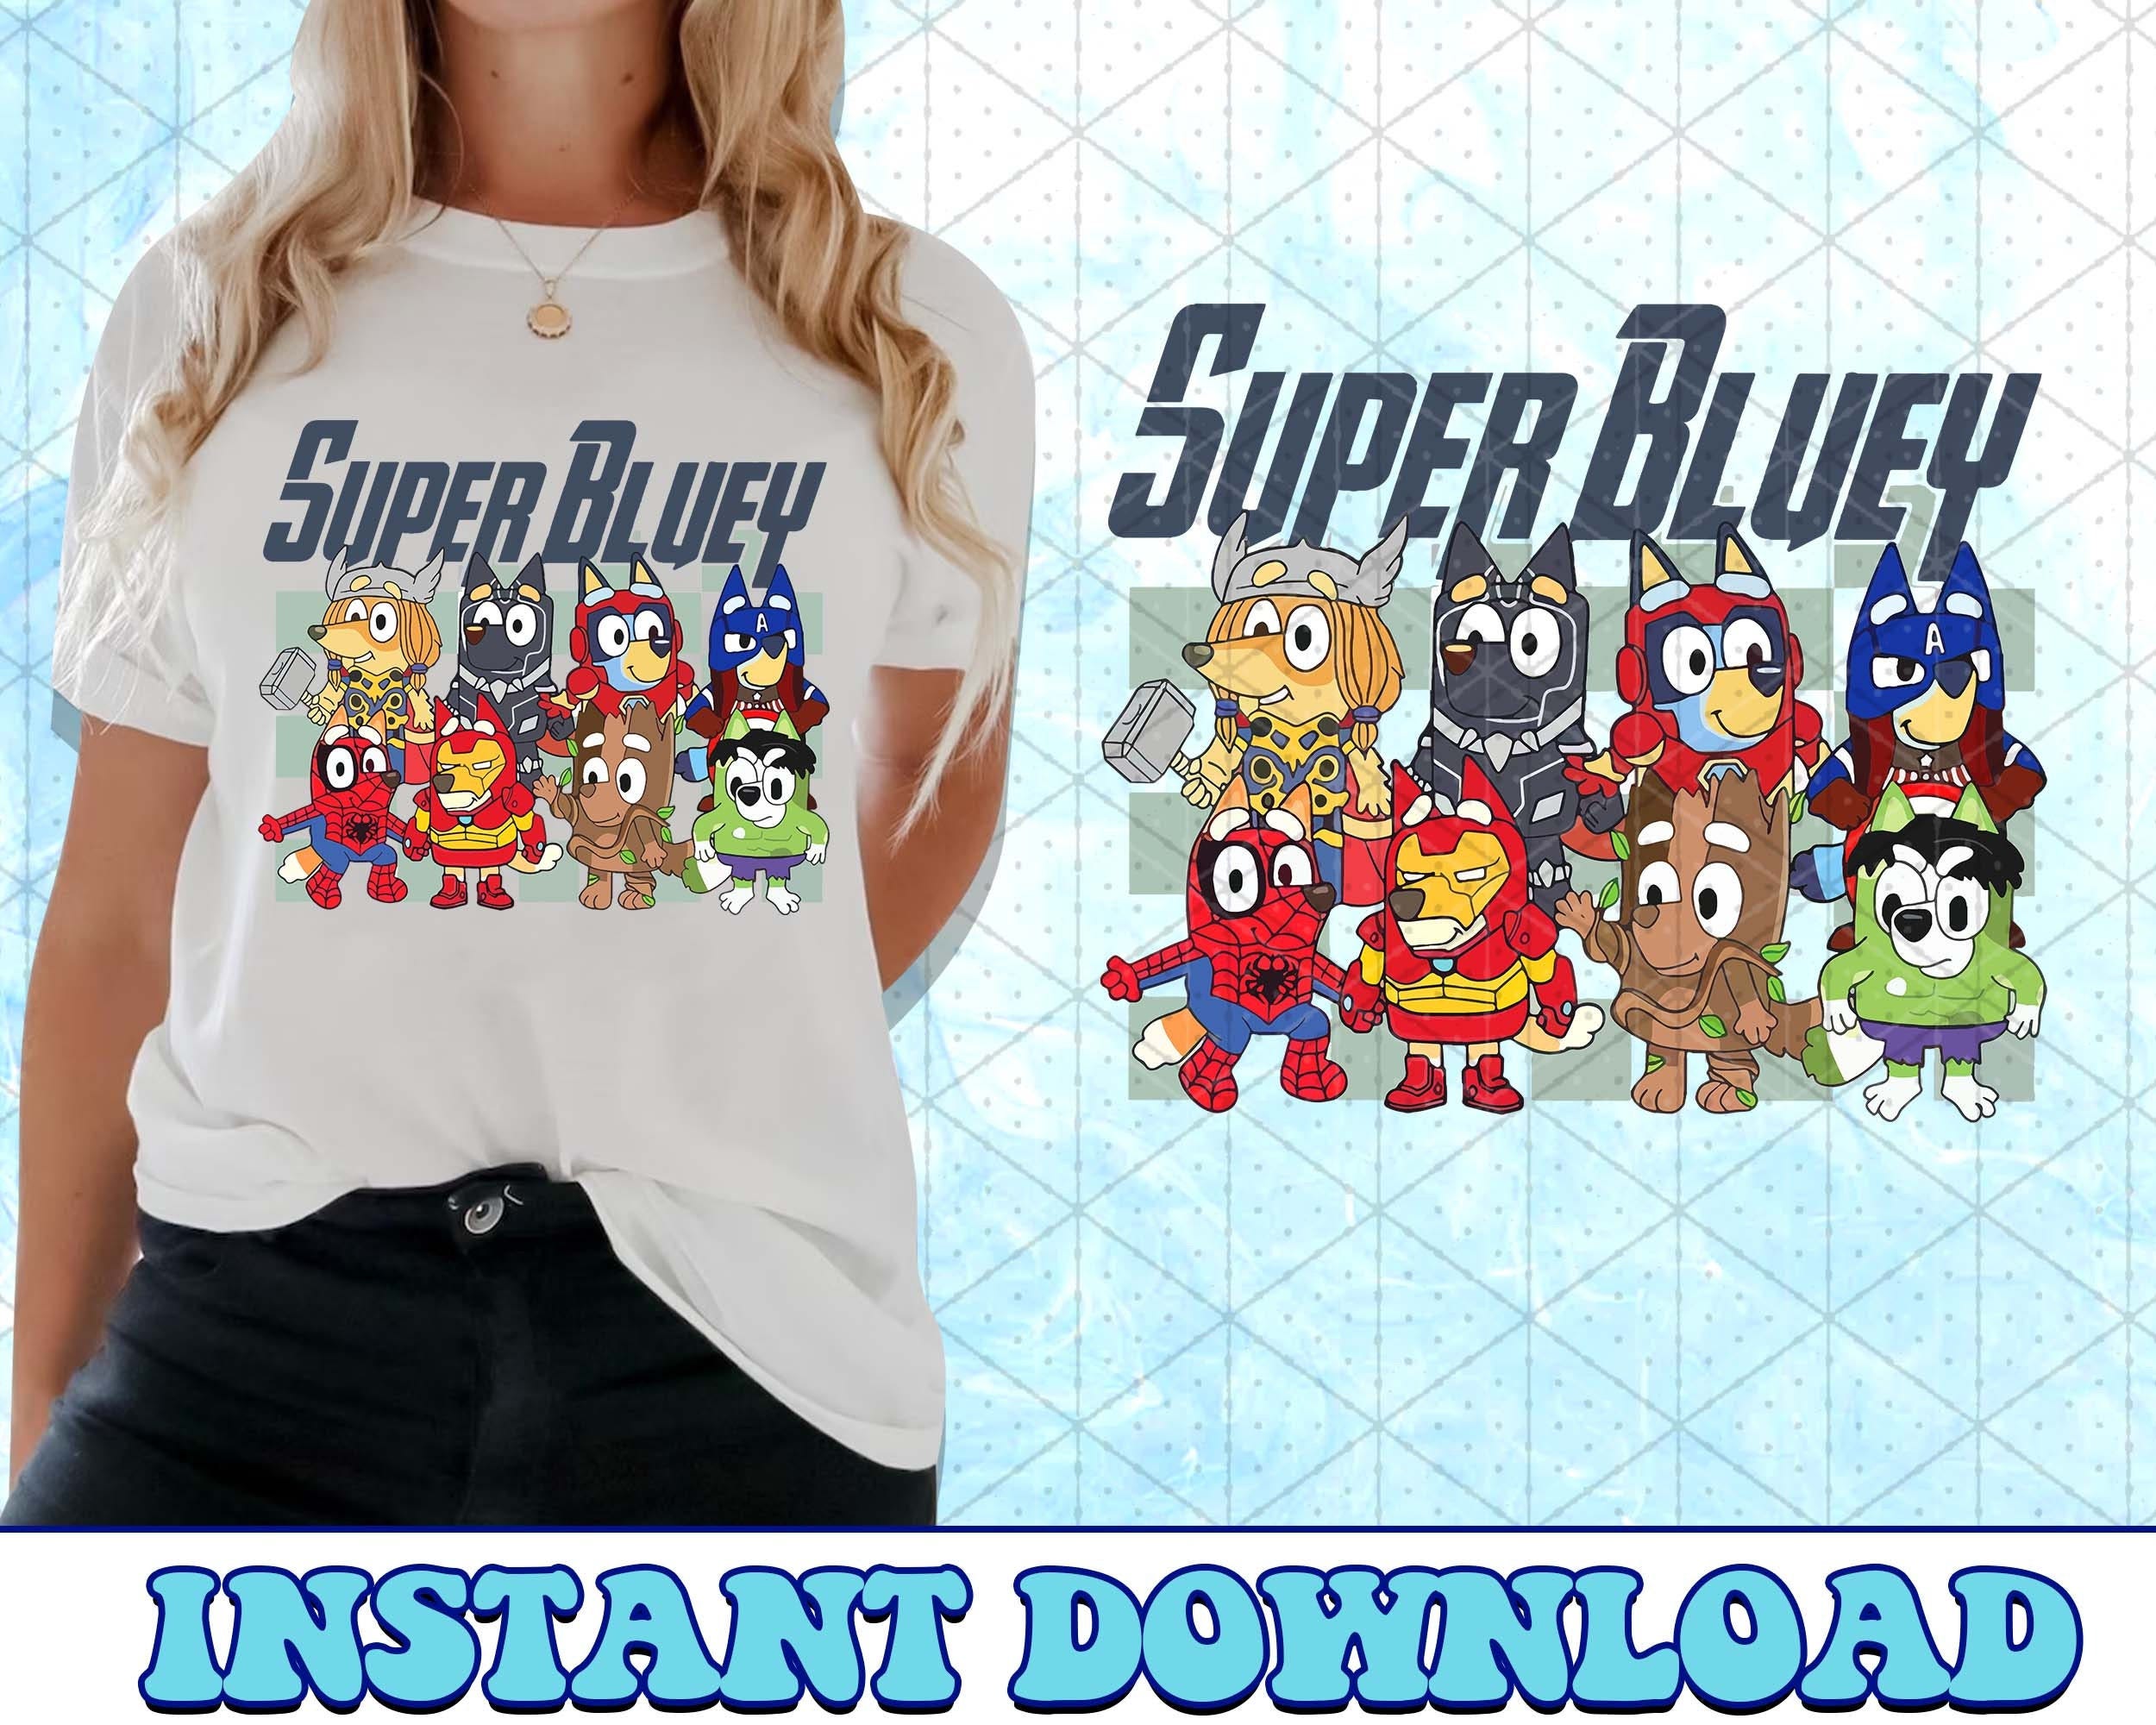 Superman Bluey PNG, Bluey Family PNG, Bluey Png, Bluey Bingo Png, Bluey Mom Png, Bluey Dad Png, Bluey Friends Png, Bluey PNG